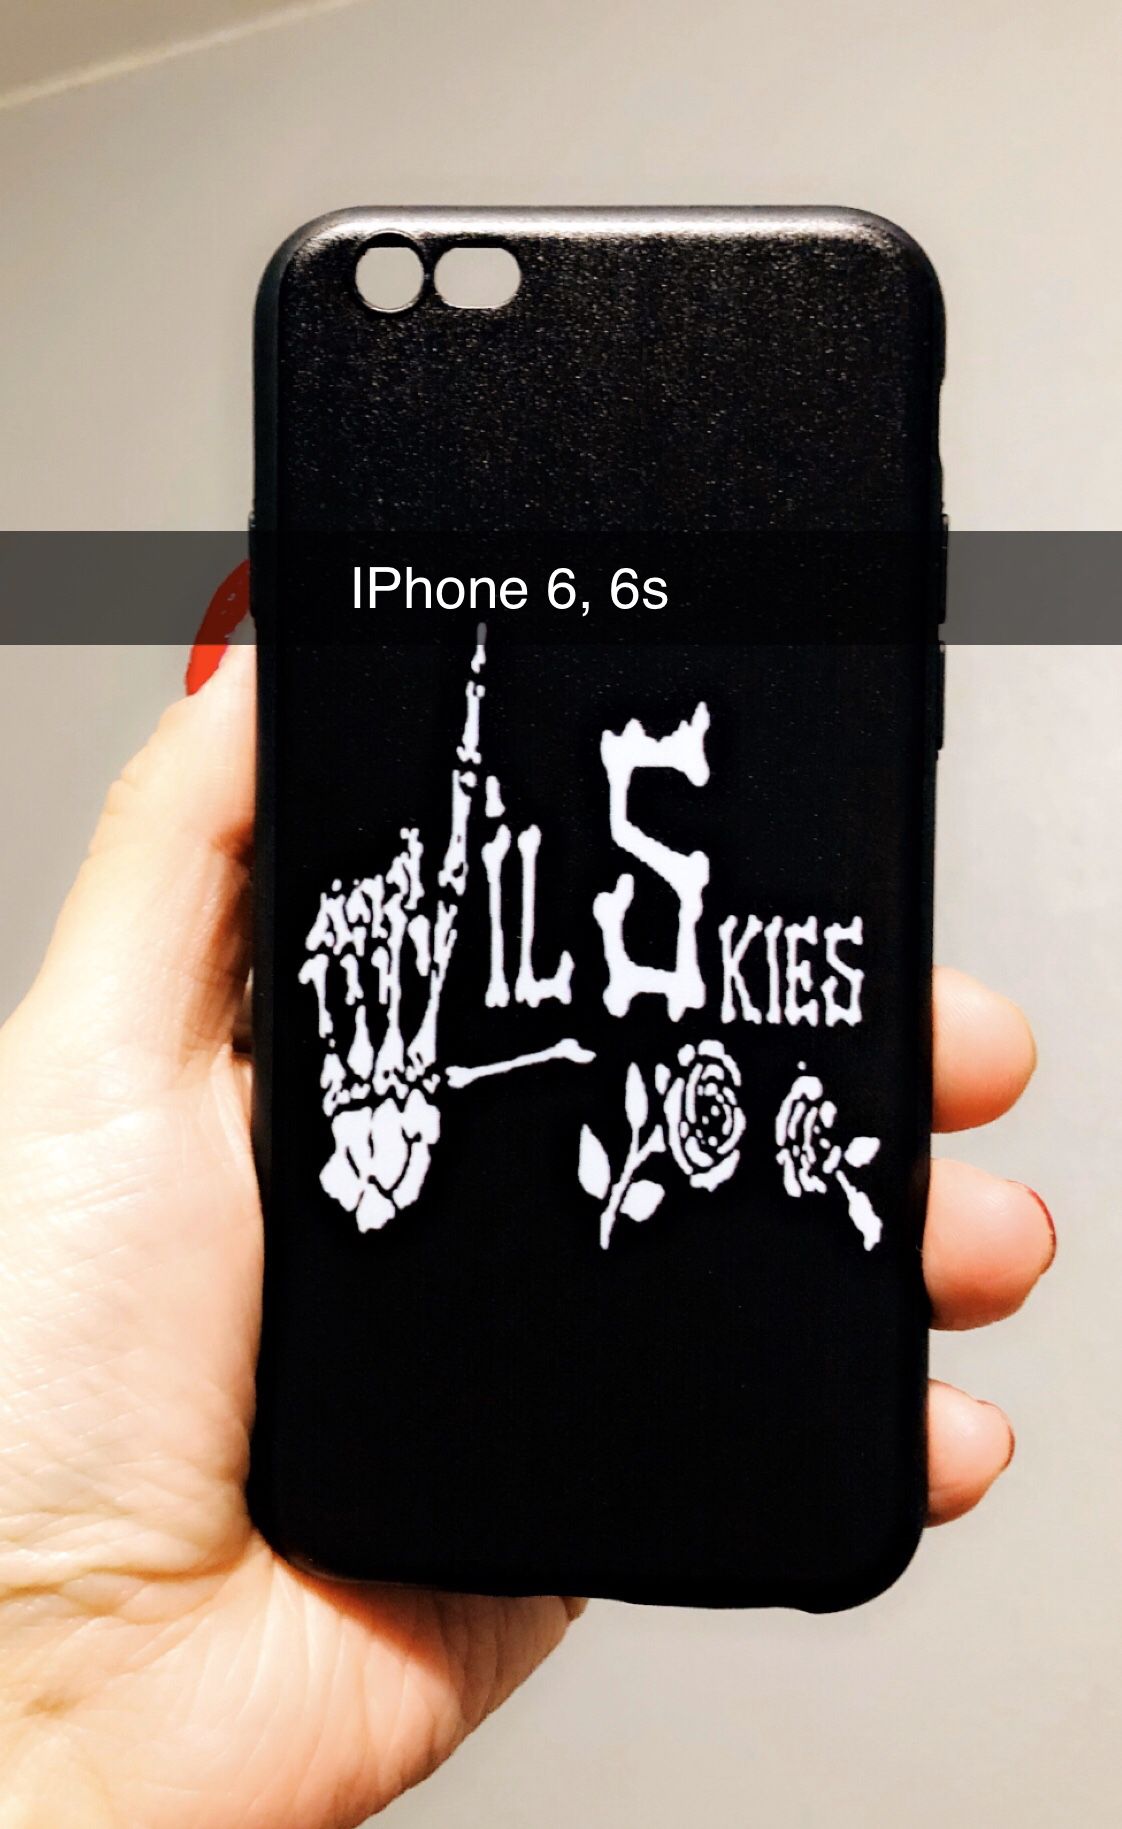 New cool regular iphone 6 or 6s case rubber lil skies rap hip hop hypebeast hype swag